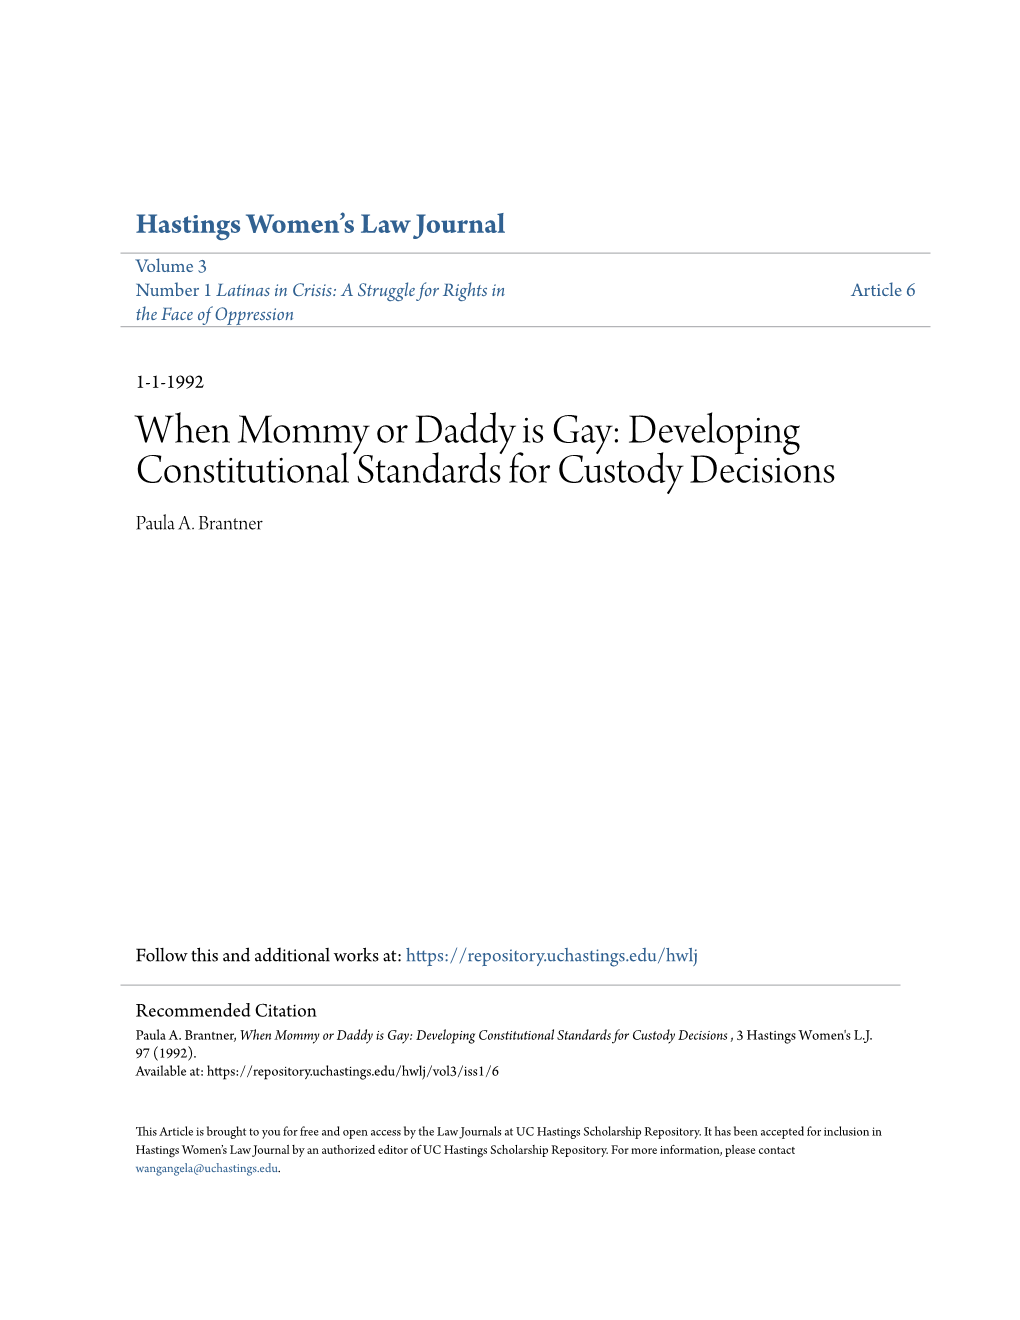 Developing Constitutional Standards for Custody Decisions Paula A